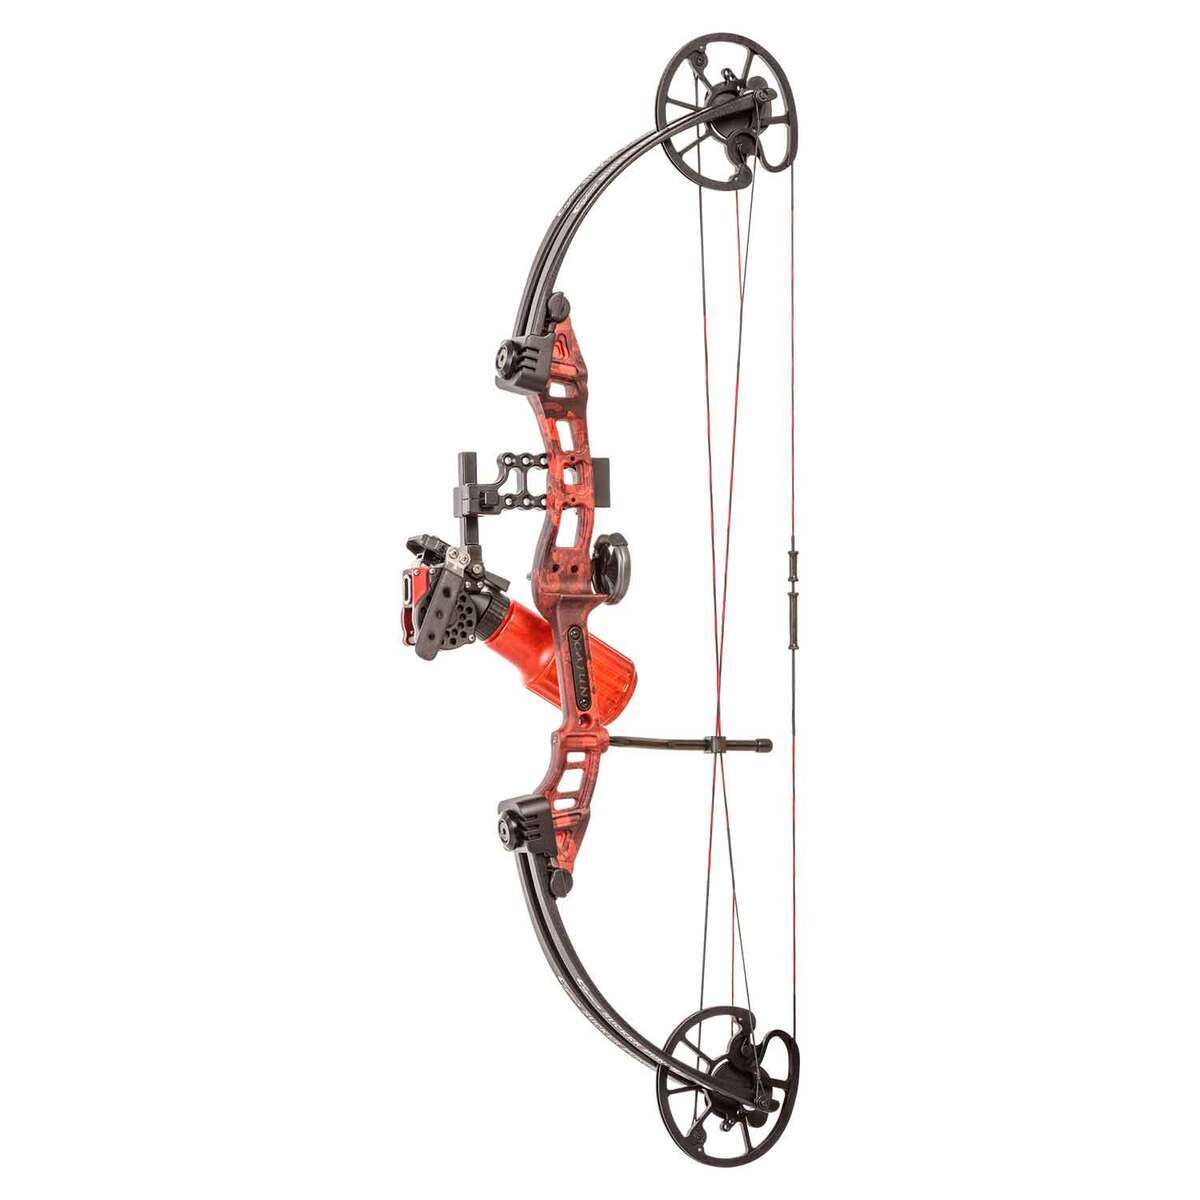 Cajun Bowfishing Sucker Punch Right Hand Ready-to-Fish Compound Bow Package